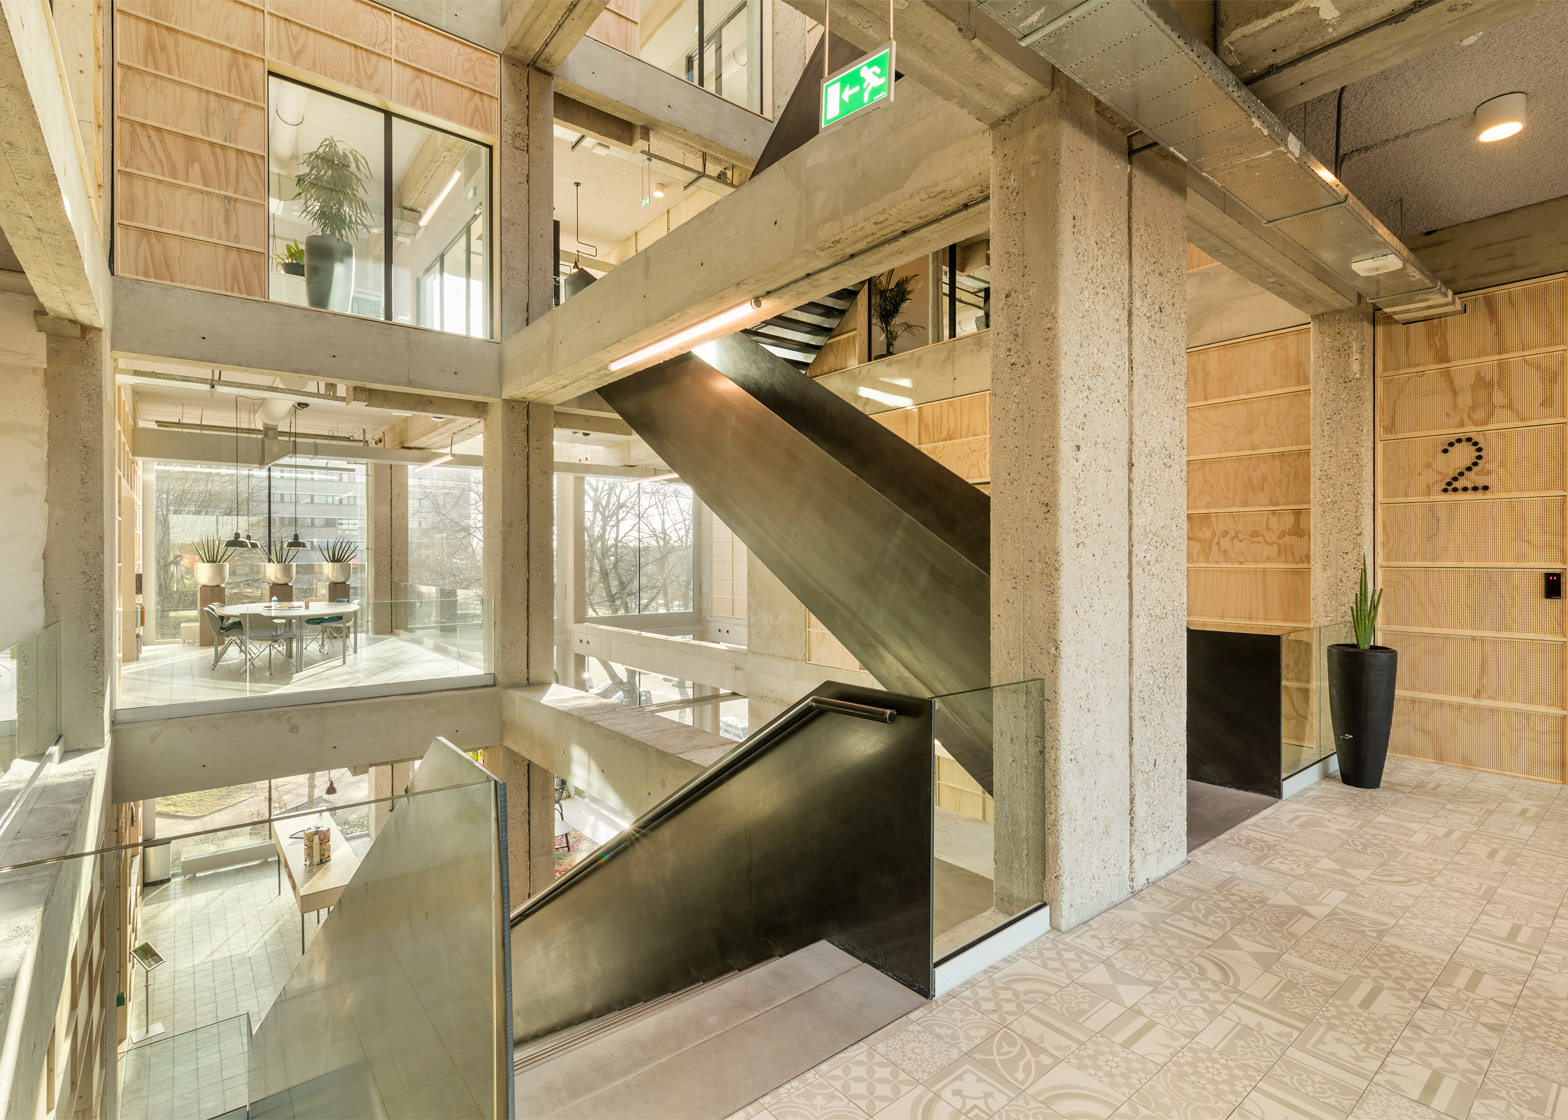 Studioninedots Carves Out An Atrium Inside Overhauled Office